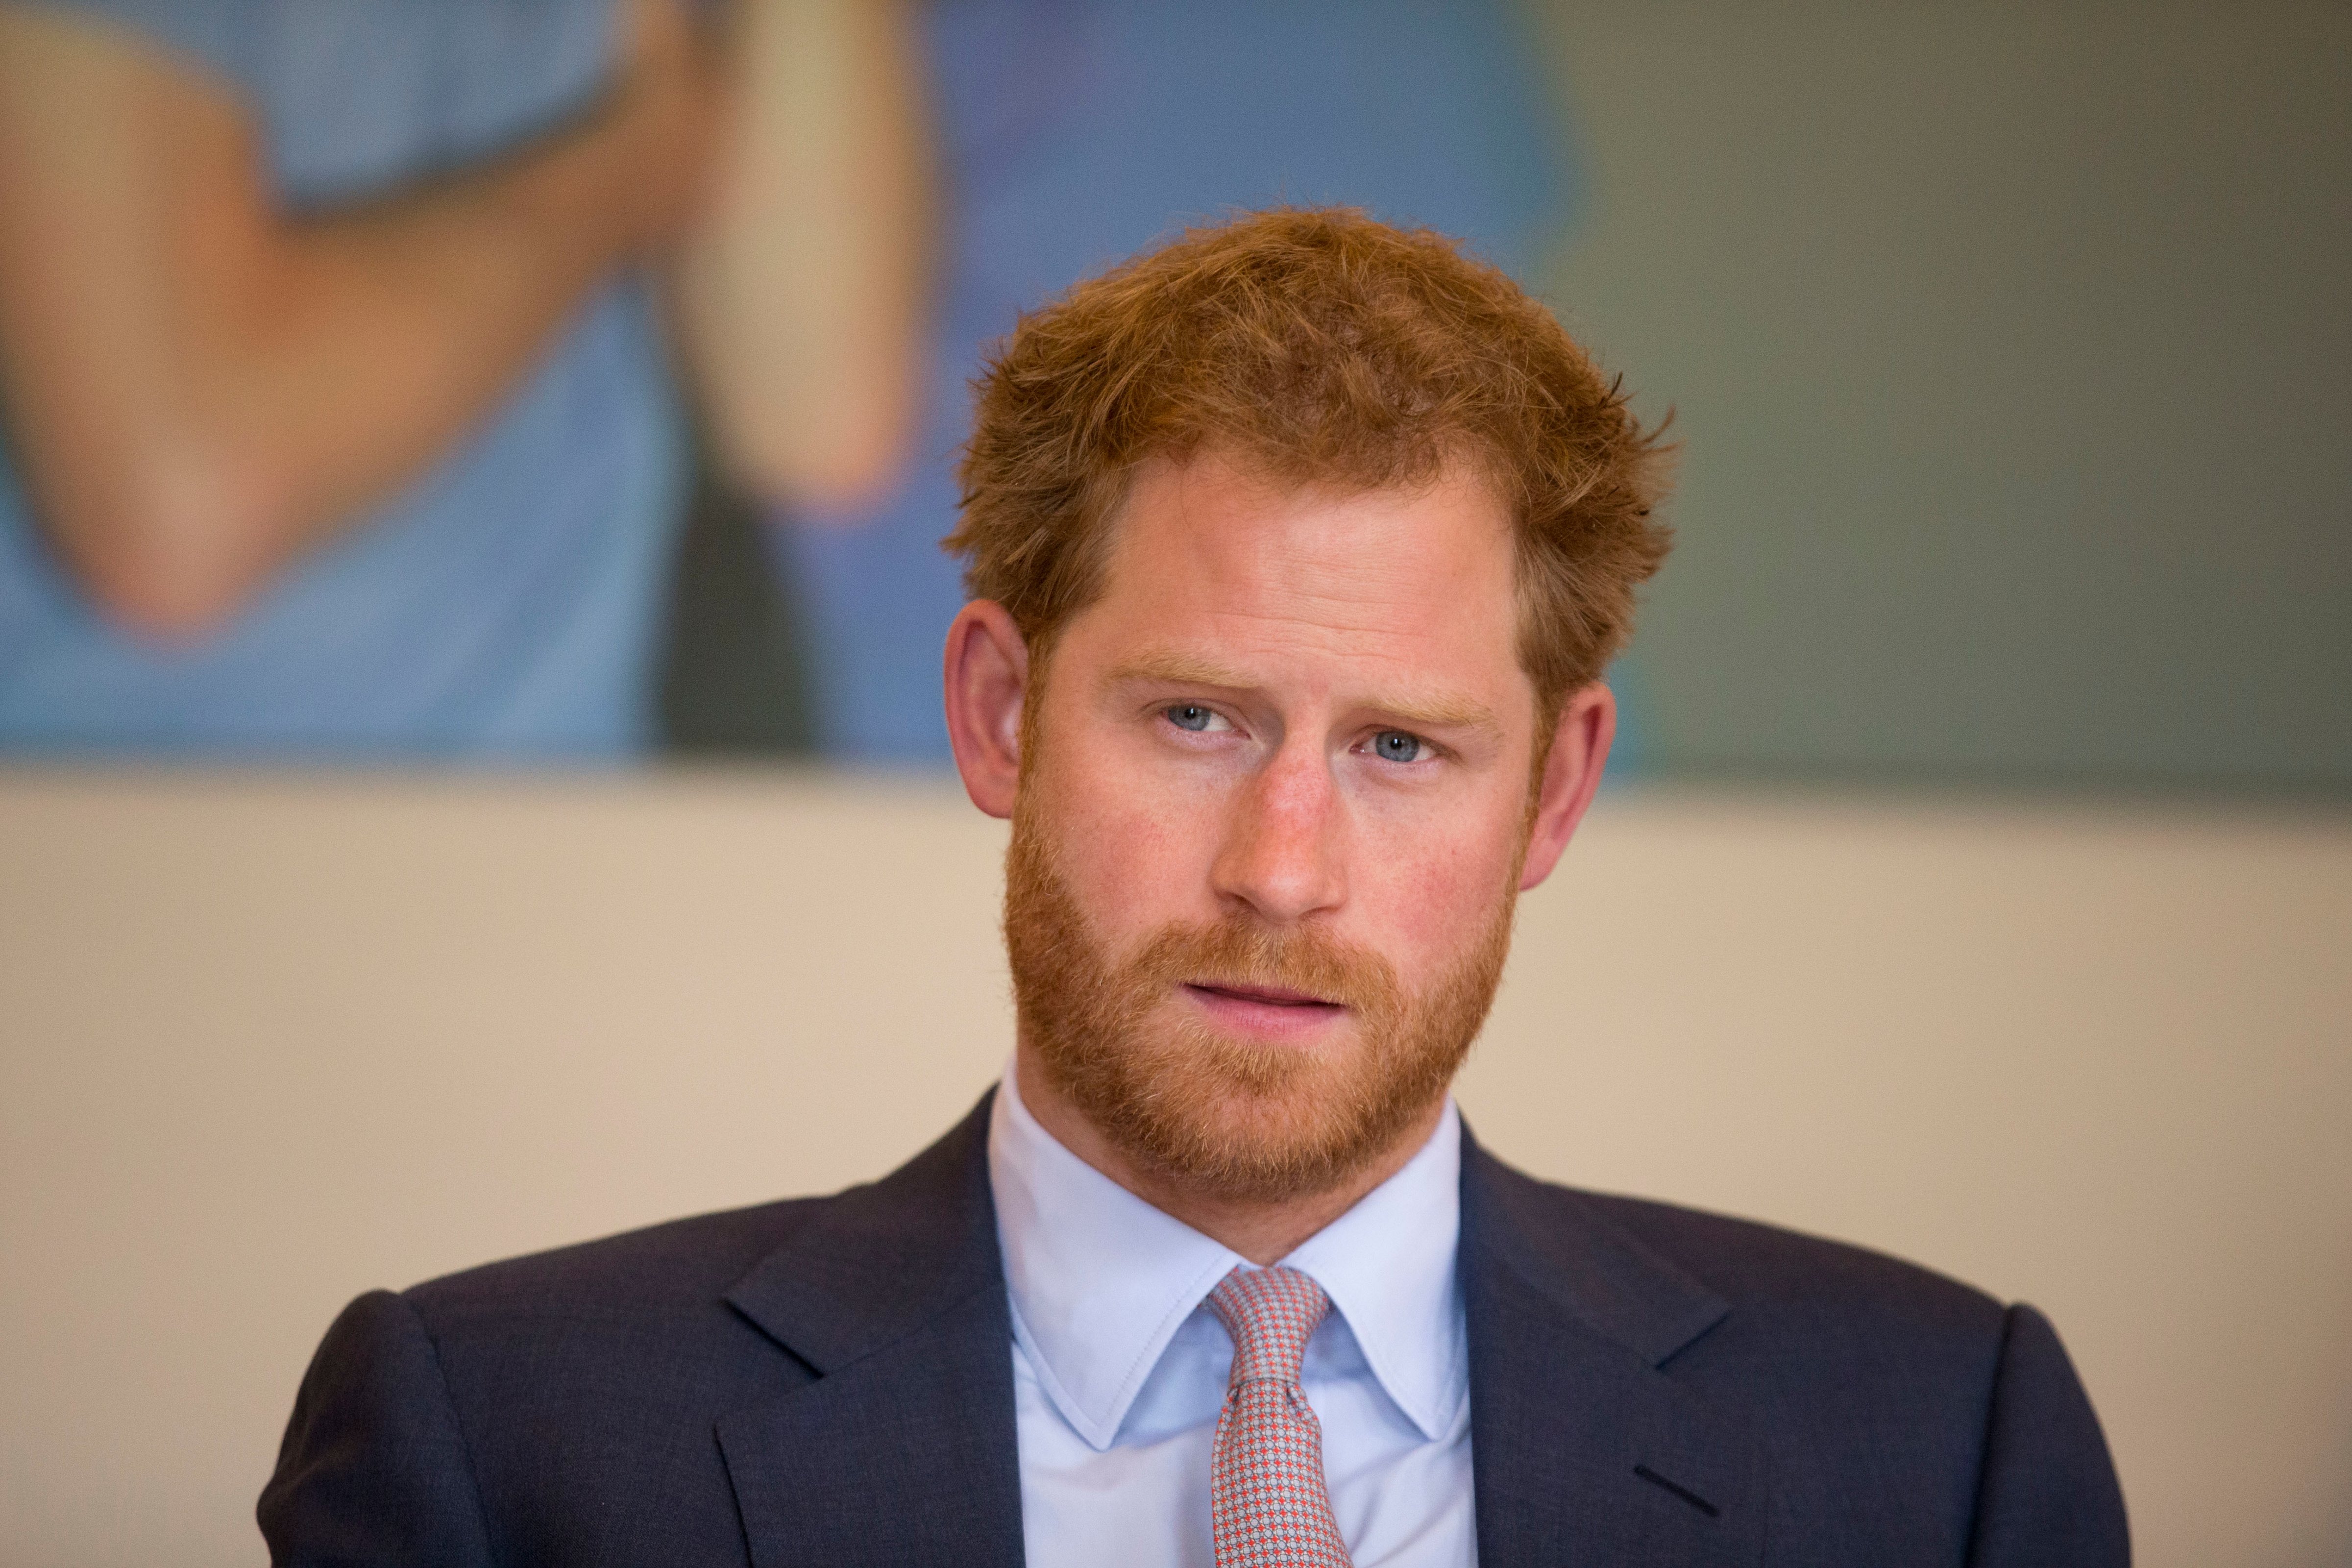 Prince Harry takes part in a round table discussion with HIV doctors as part of his desire to raise public awareness in the fight against HIV and AIDS both internationally and in the UK at King's College Hospital on July 7, 2016 in London, England. (Matt Dunham—WPA Pool/Getty Images)